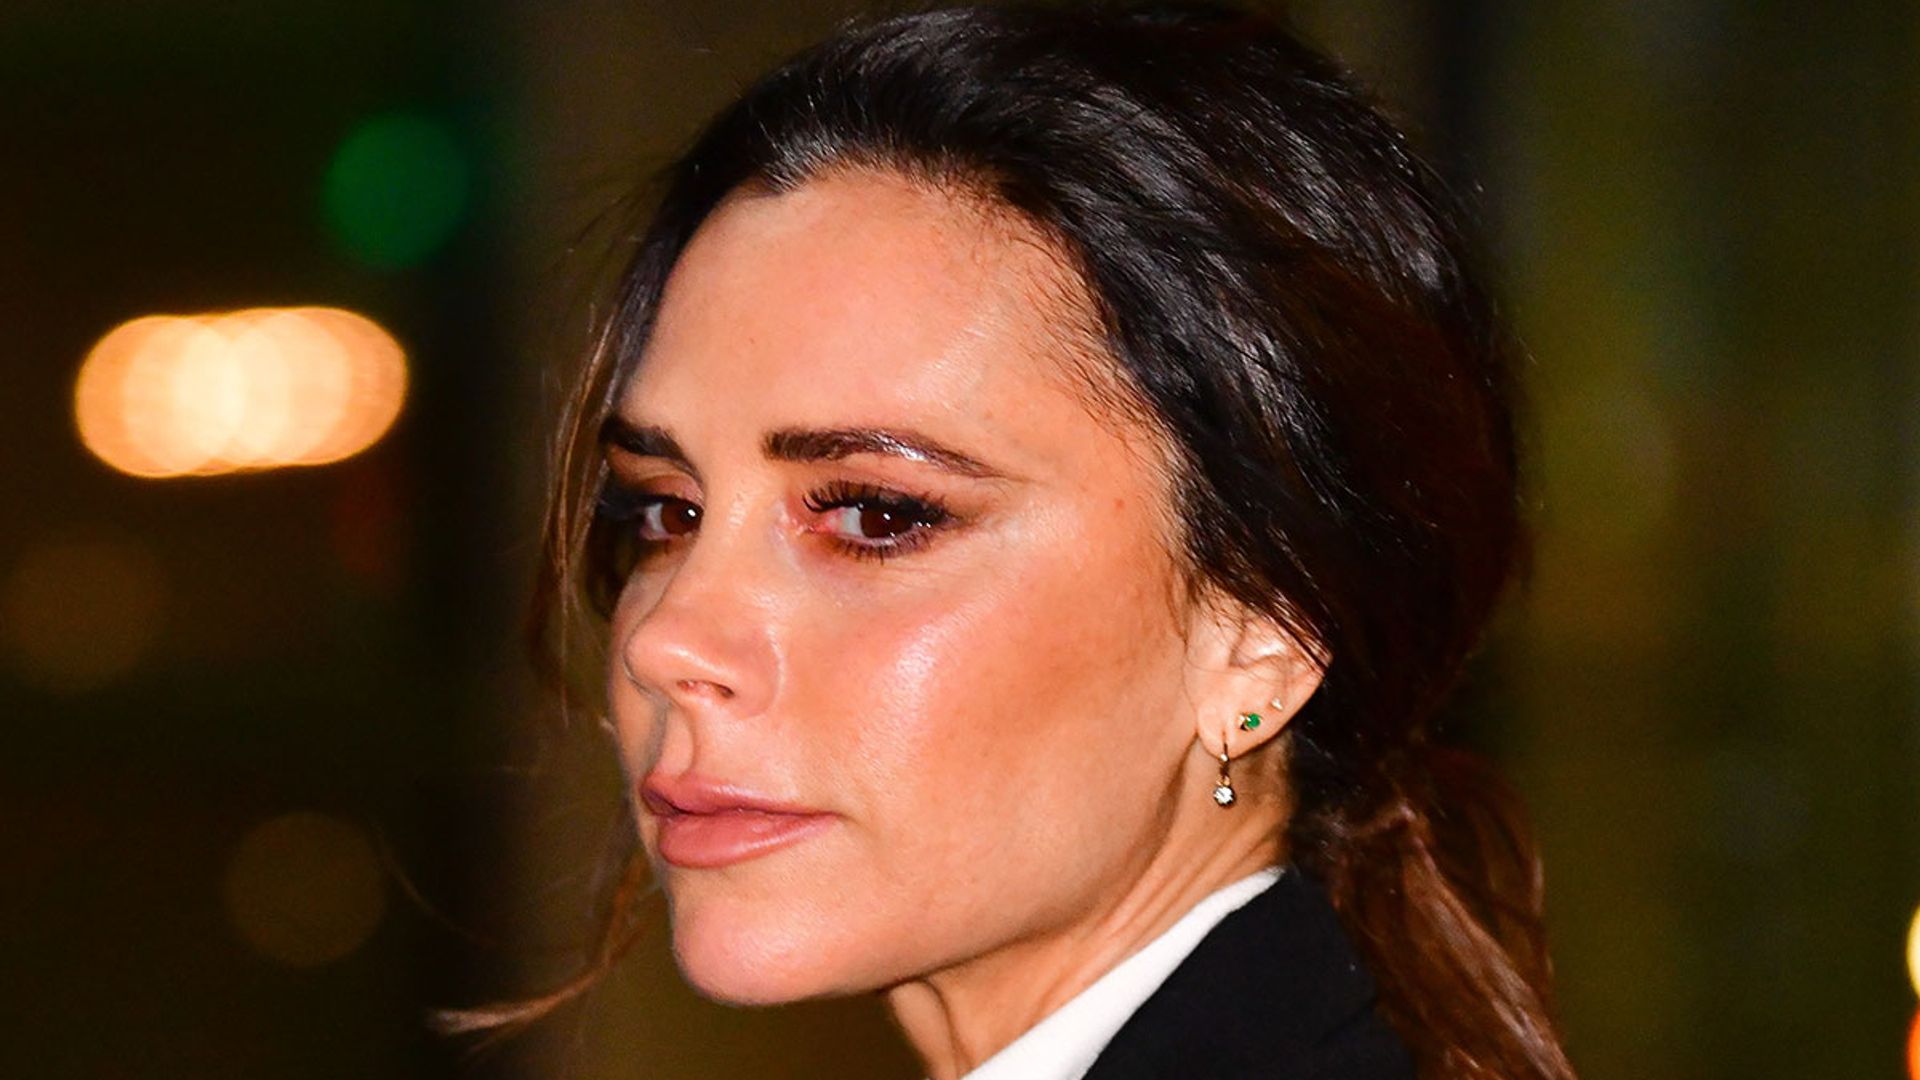 Victoria Beckham just revealed her secret piercings  they may surprise you   HELLO